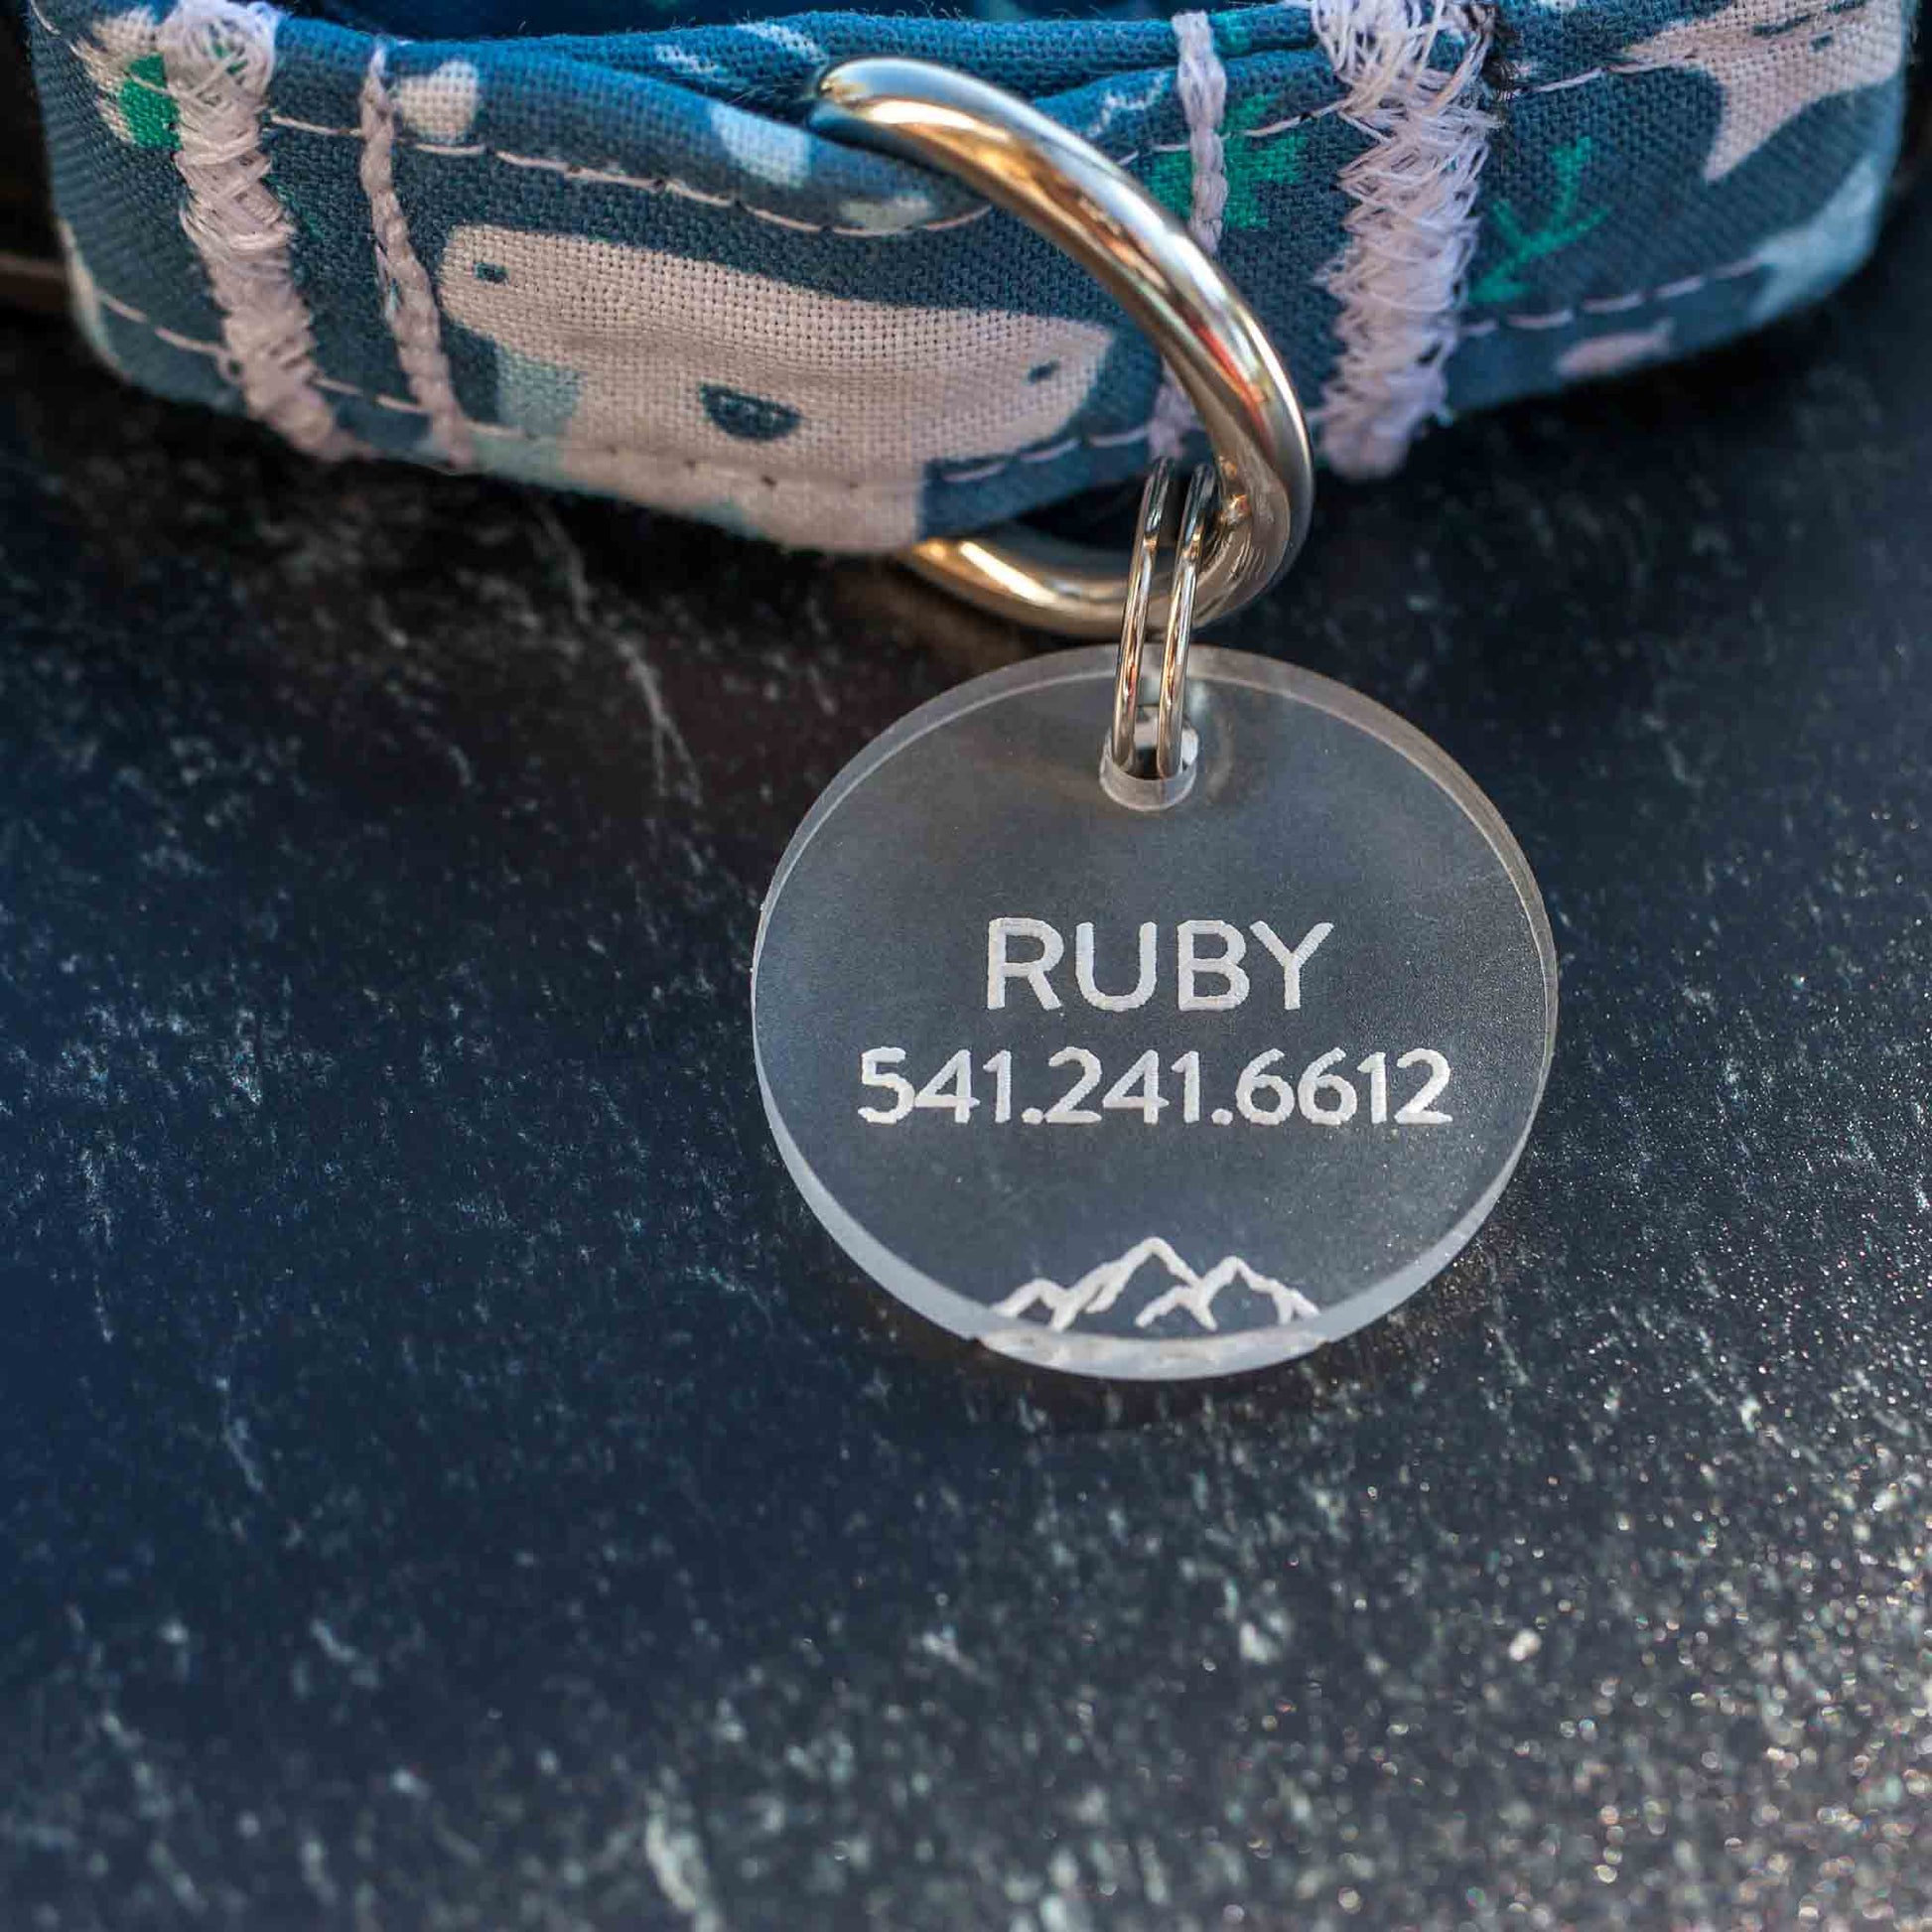 personalized pet tag - engraved acrylic mountain design, clean font on custom collar by dog pack collars - by LeeMo Designs in Bend, Oregon